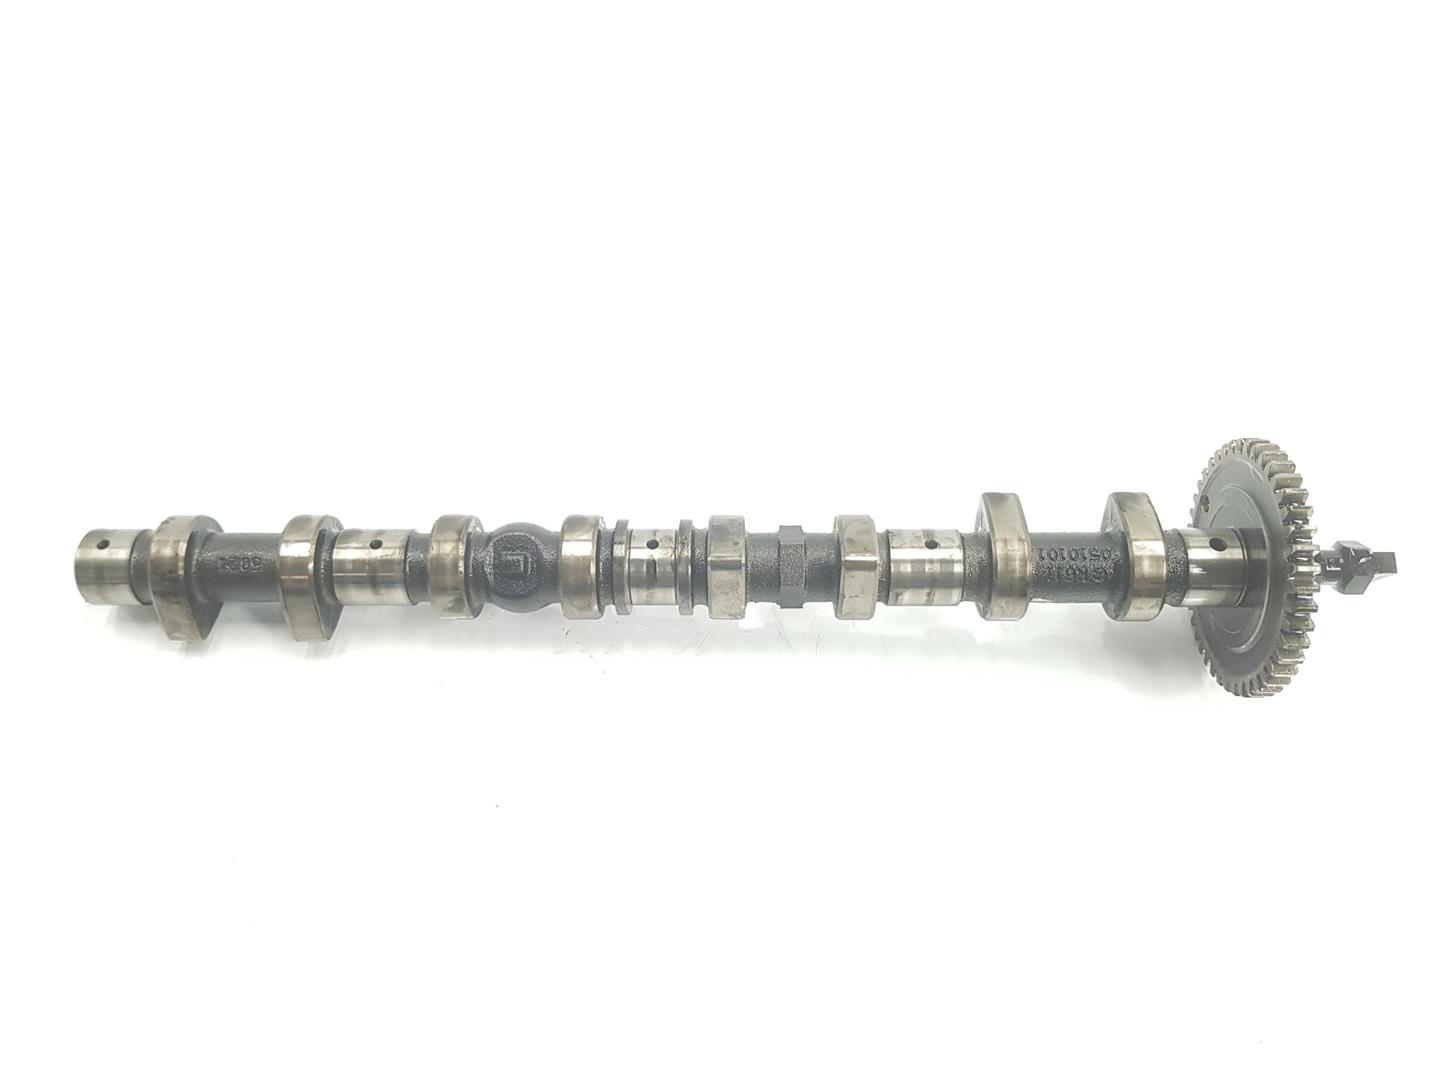 MERCEDES-BENZ Vito W638 (1996-2003) Exhaust Camshaft A6110502201, A6110500801, ADMISION 19910244